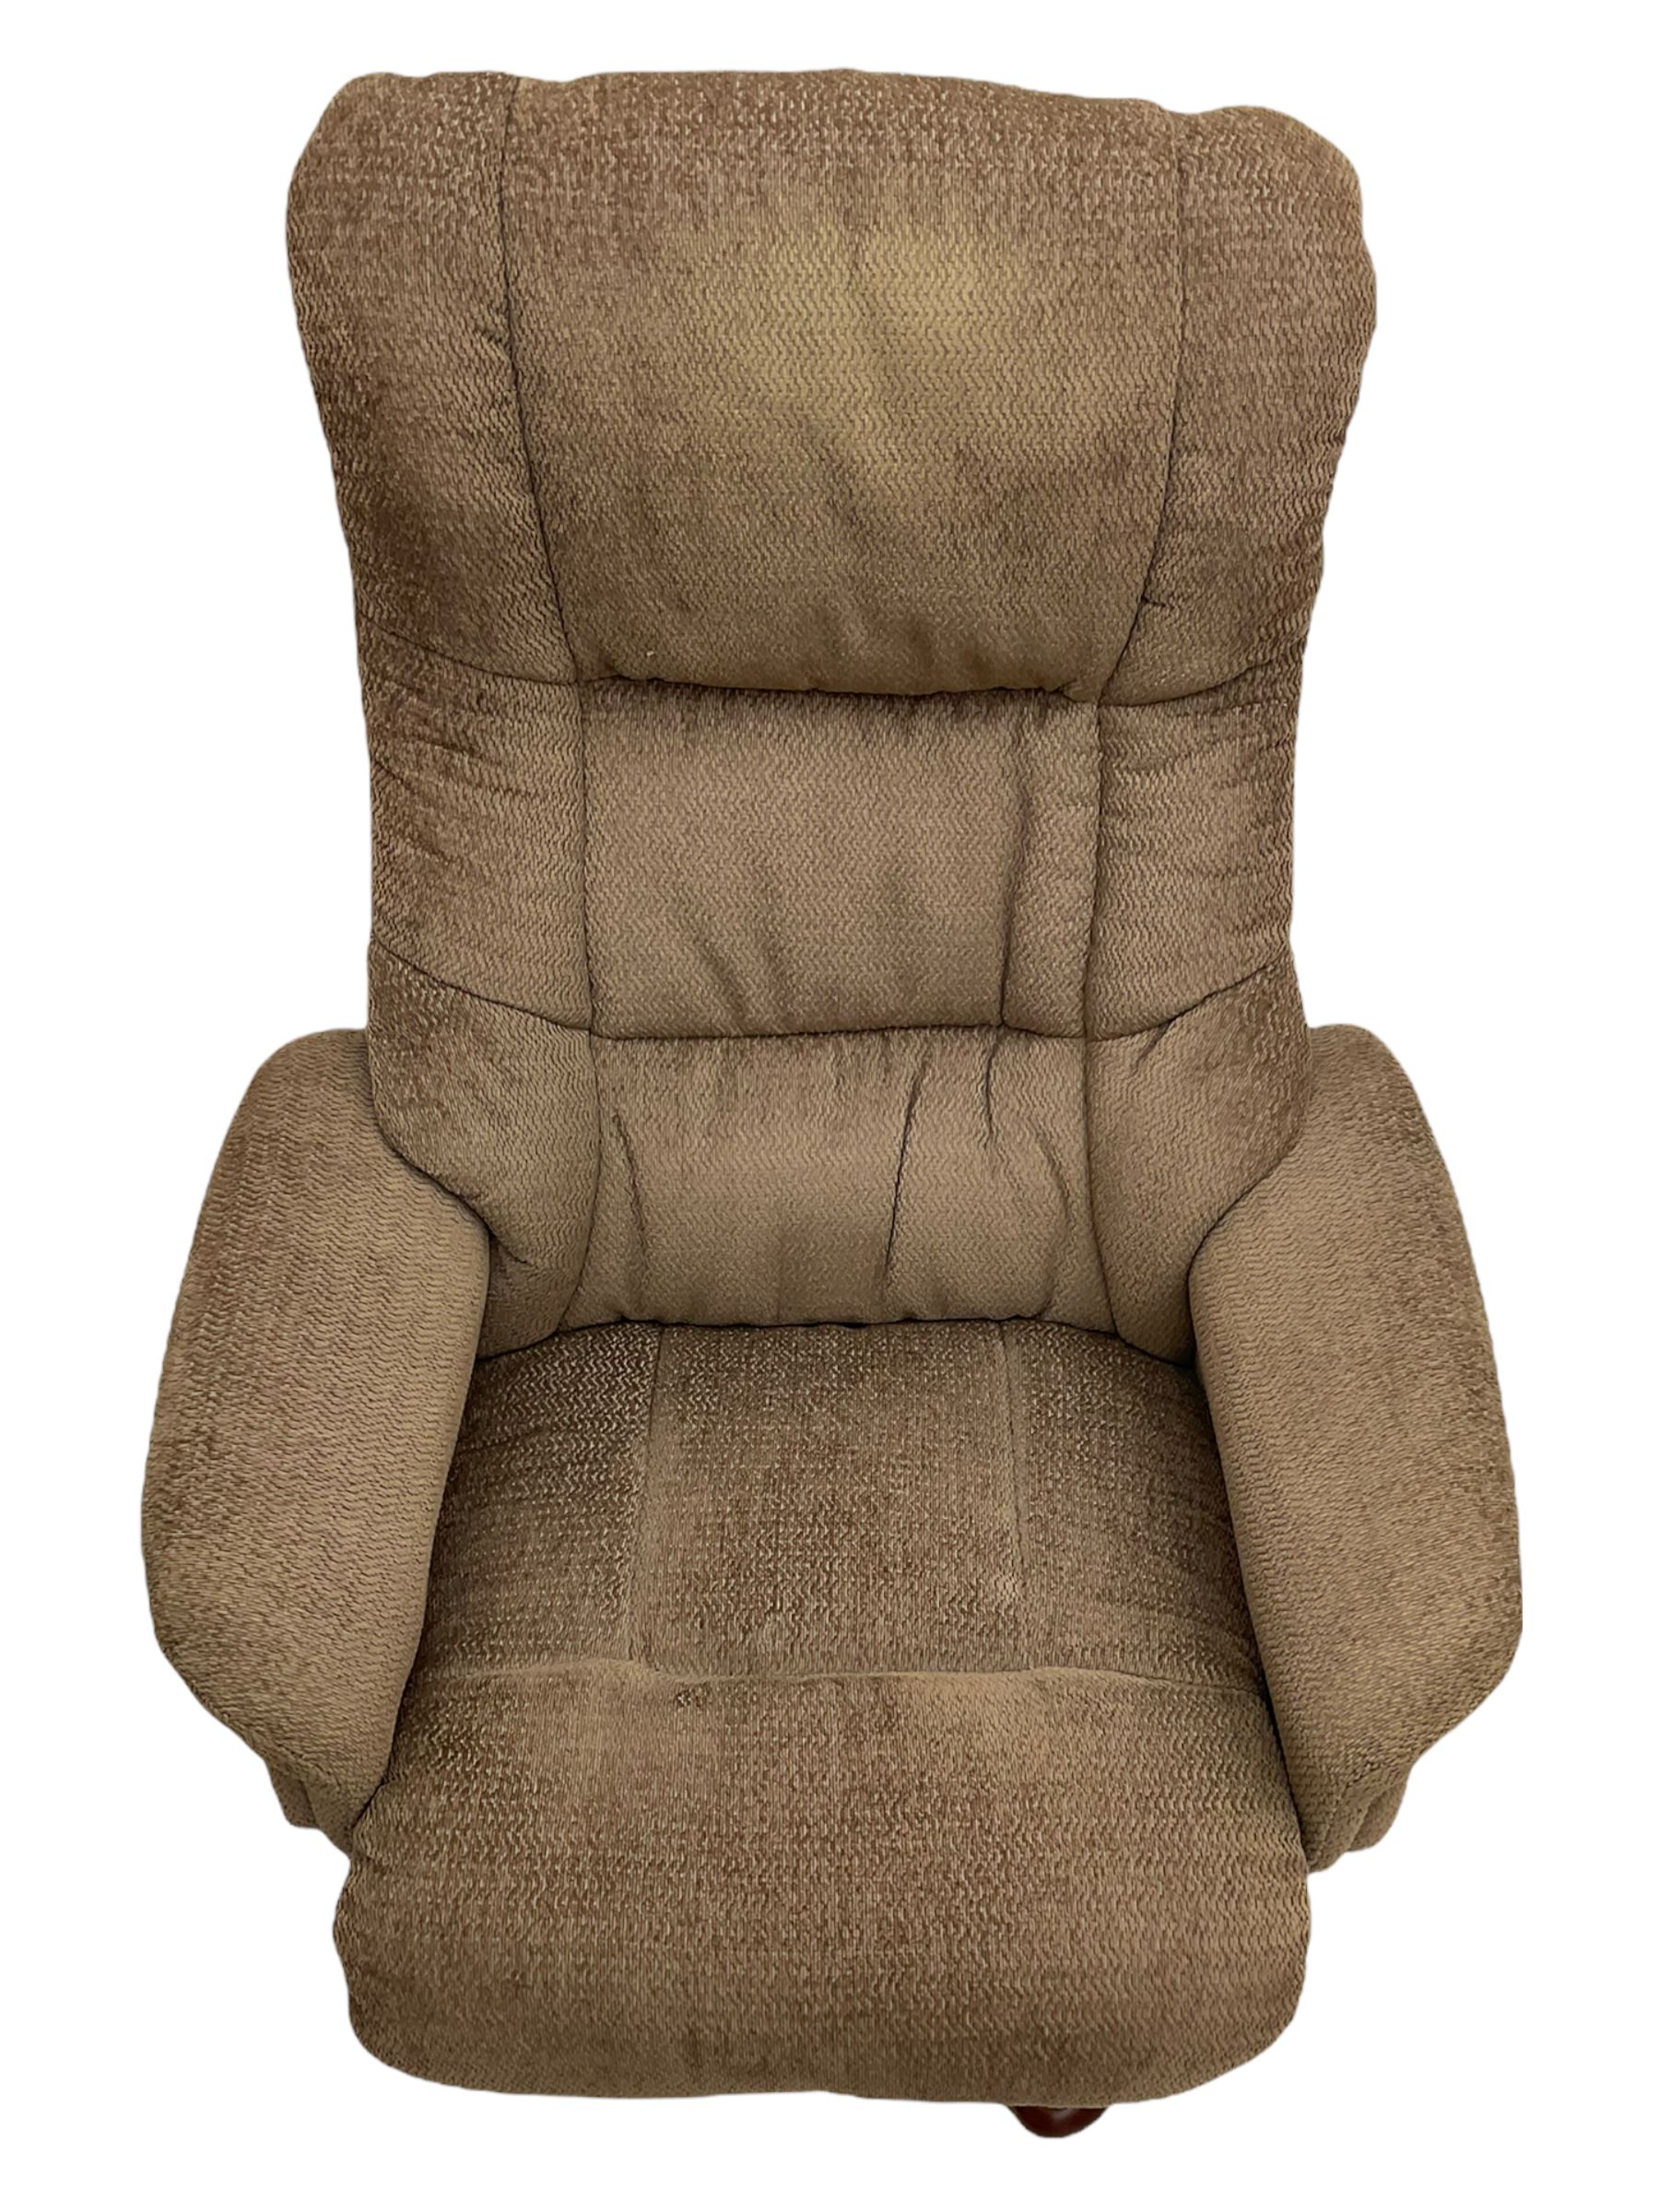 Contemporary lounge chair with matching footstool - Image 4 of 14